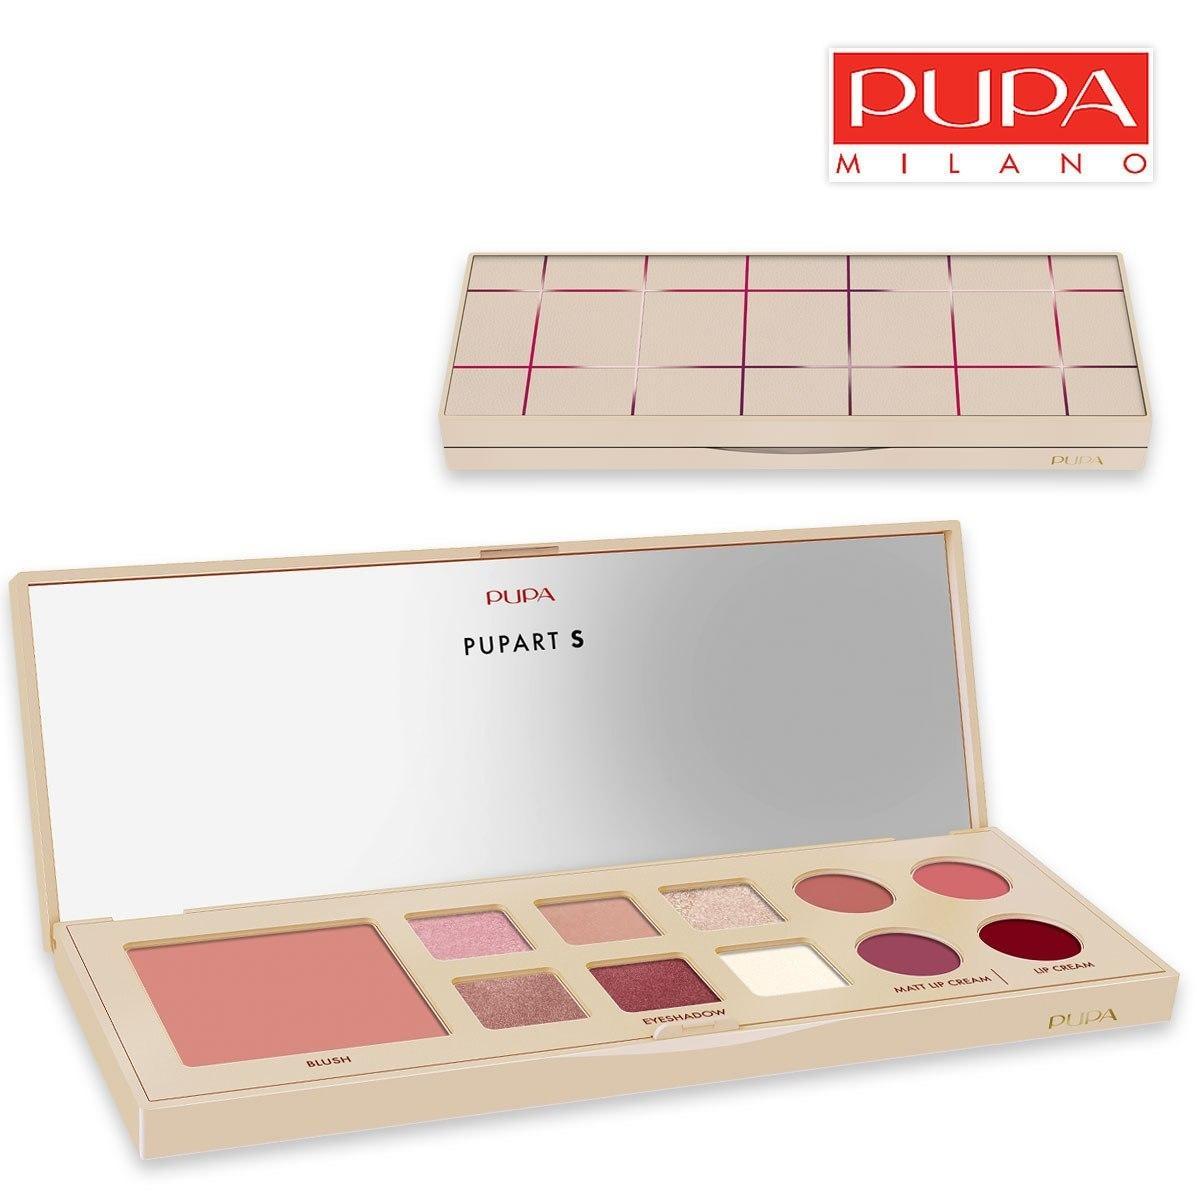 Pupa Pupart S Lips Trousse Make up n. 001 Really Nude